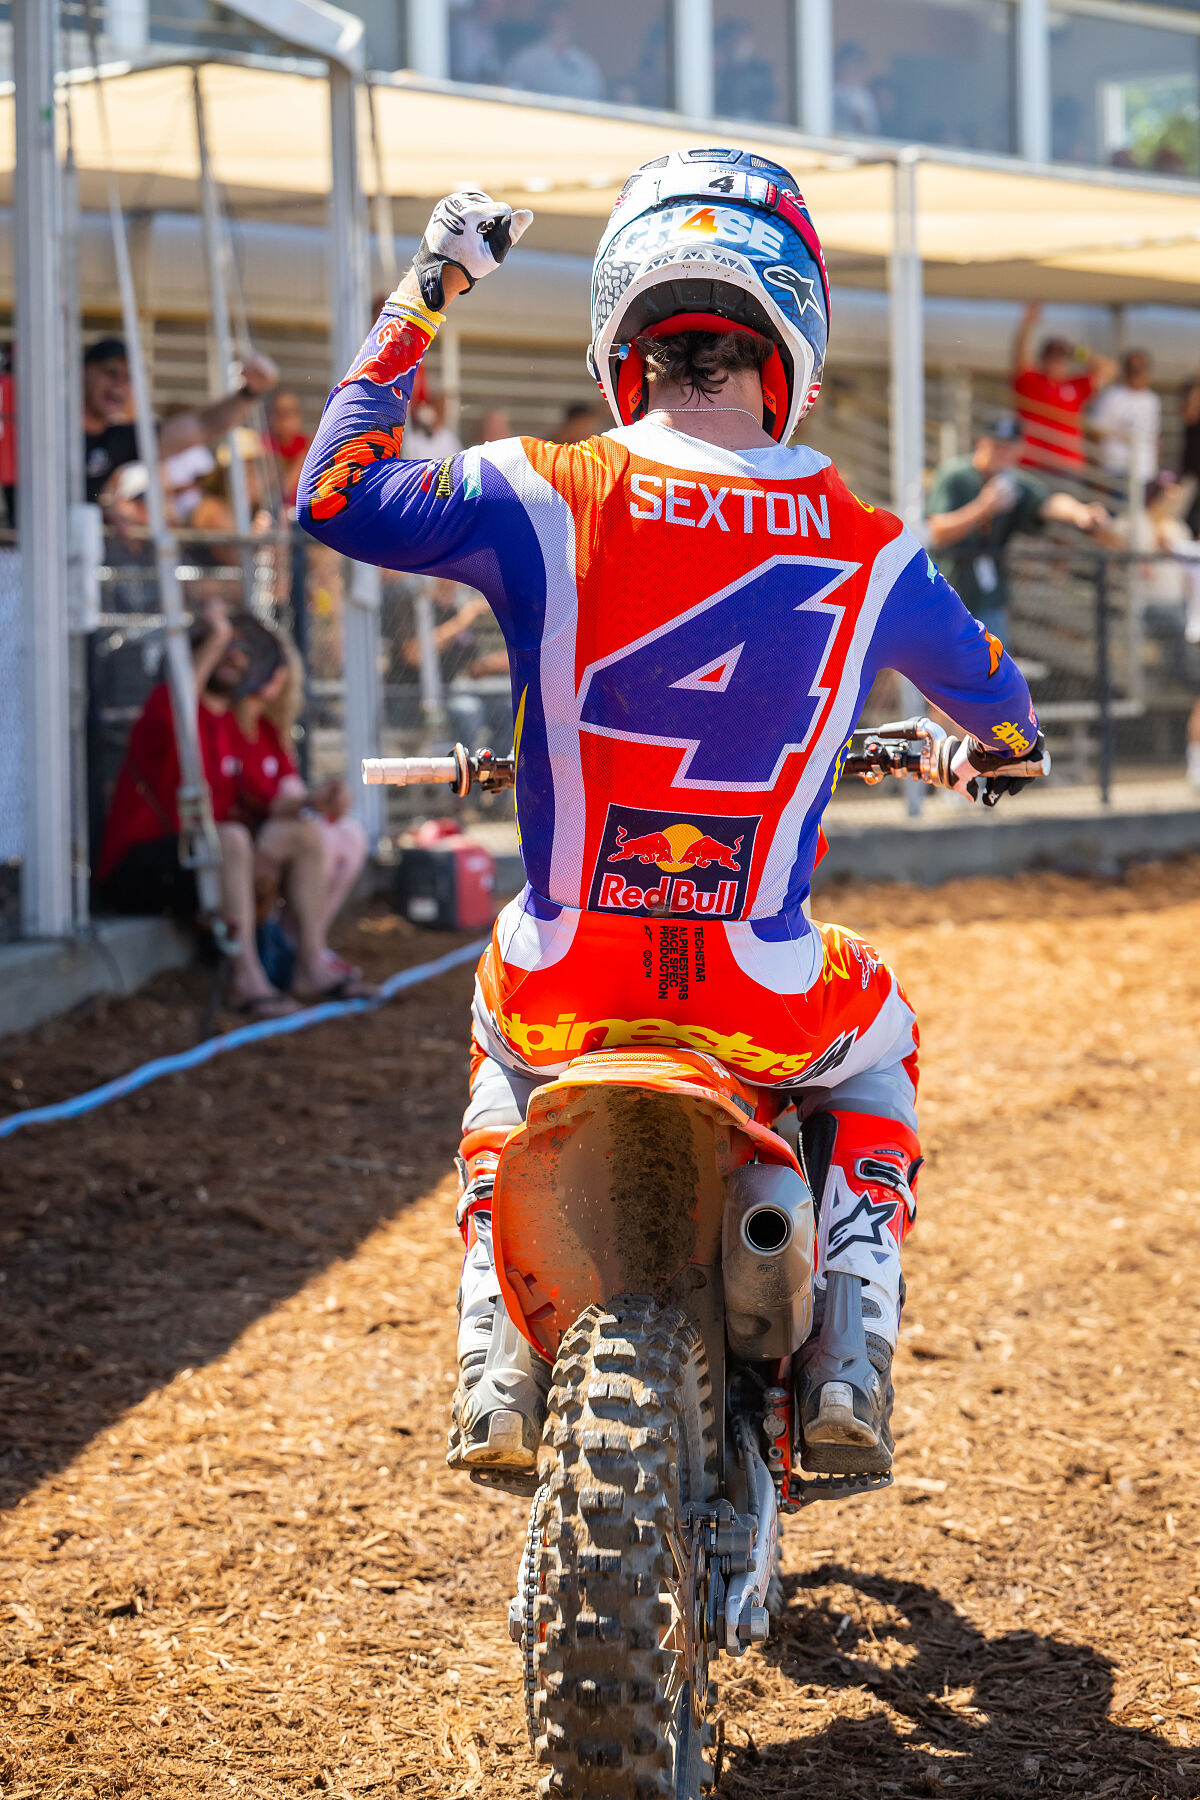 CHASE SEXTON 04 - RED BULL KTM FACTORY RACING - HANGTOWN